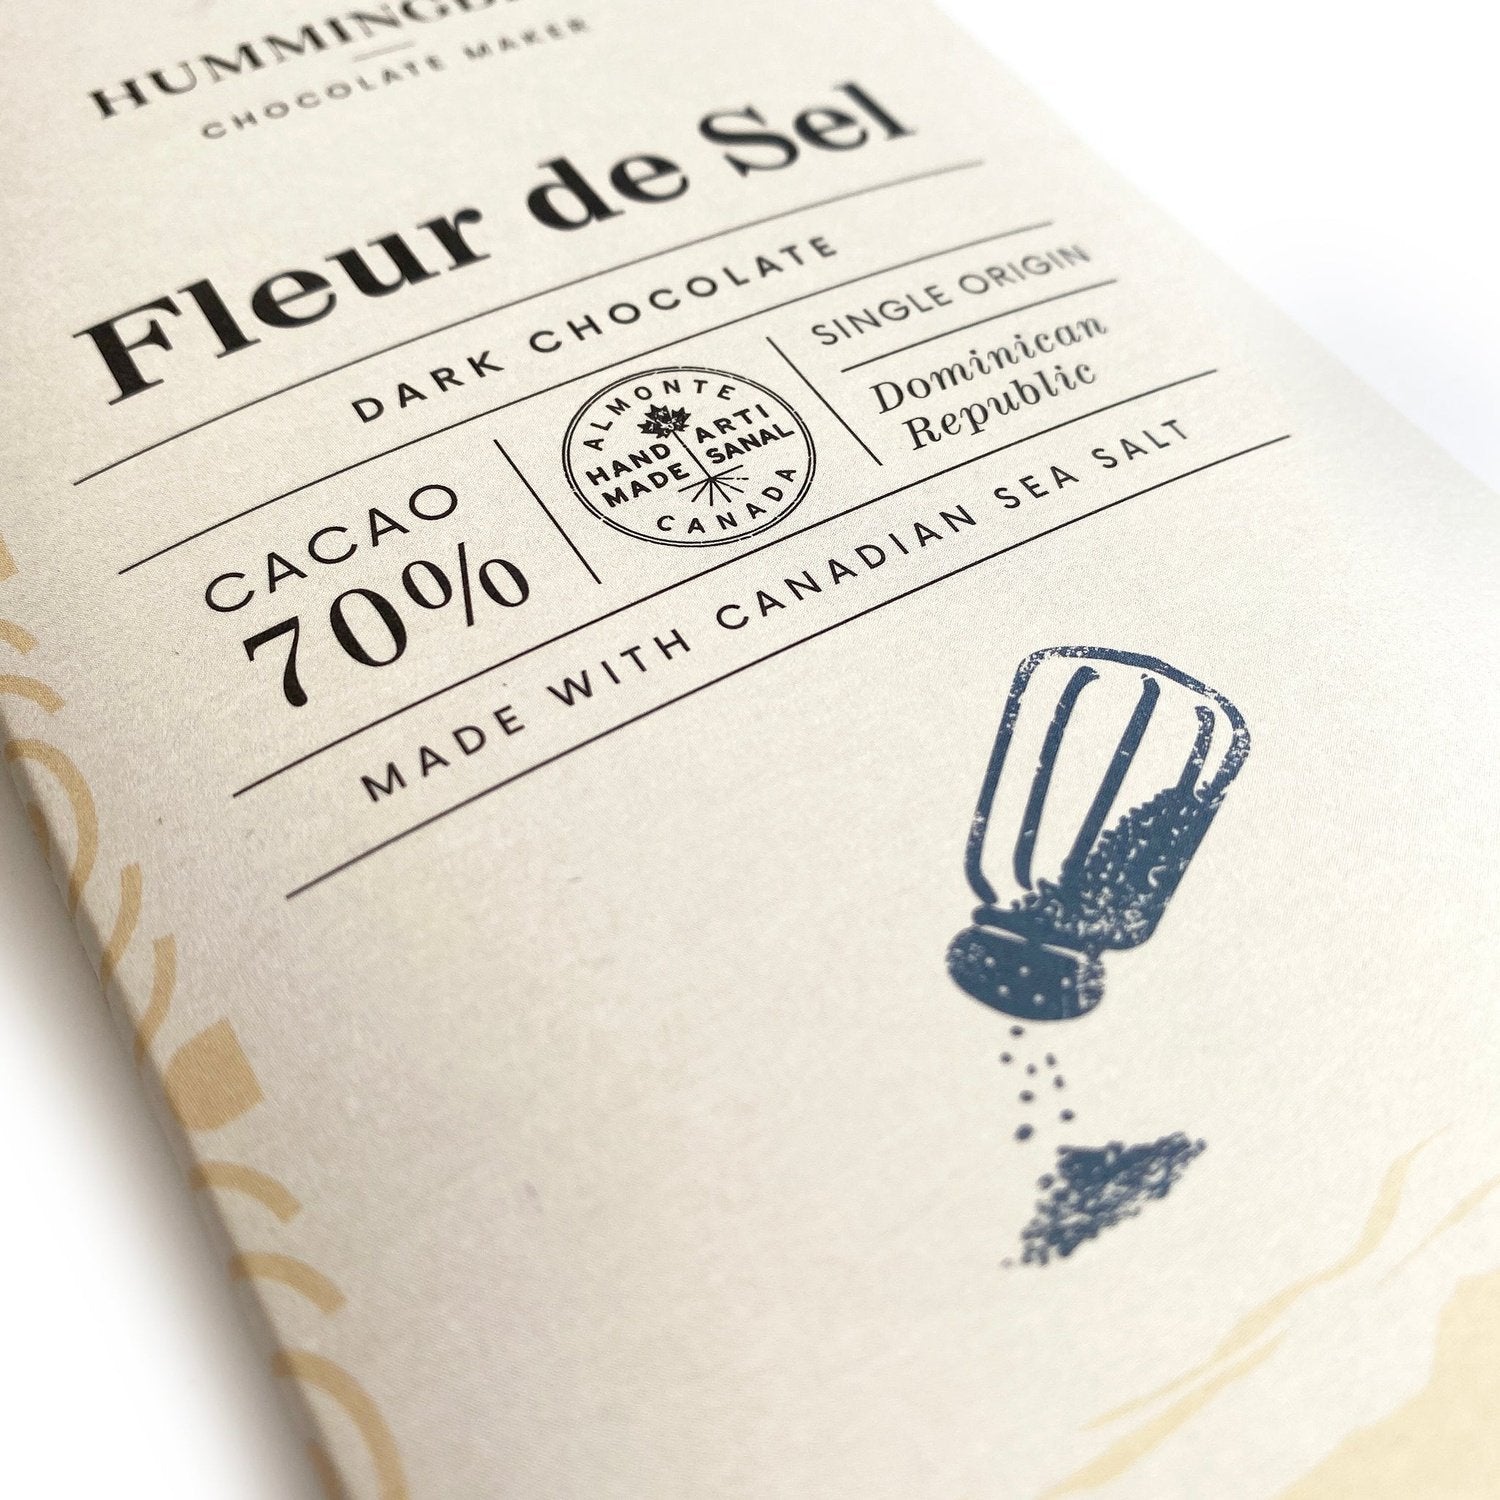 Close up of Fleur de Sel chocolate bar showing bar is made with Canadian sea salt